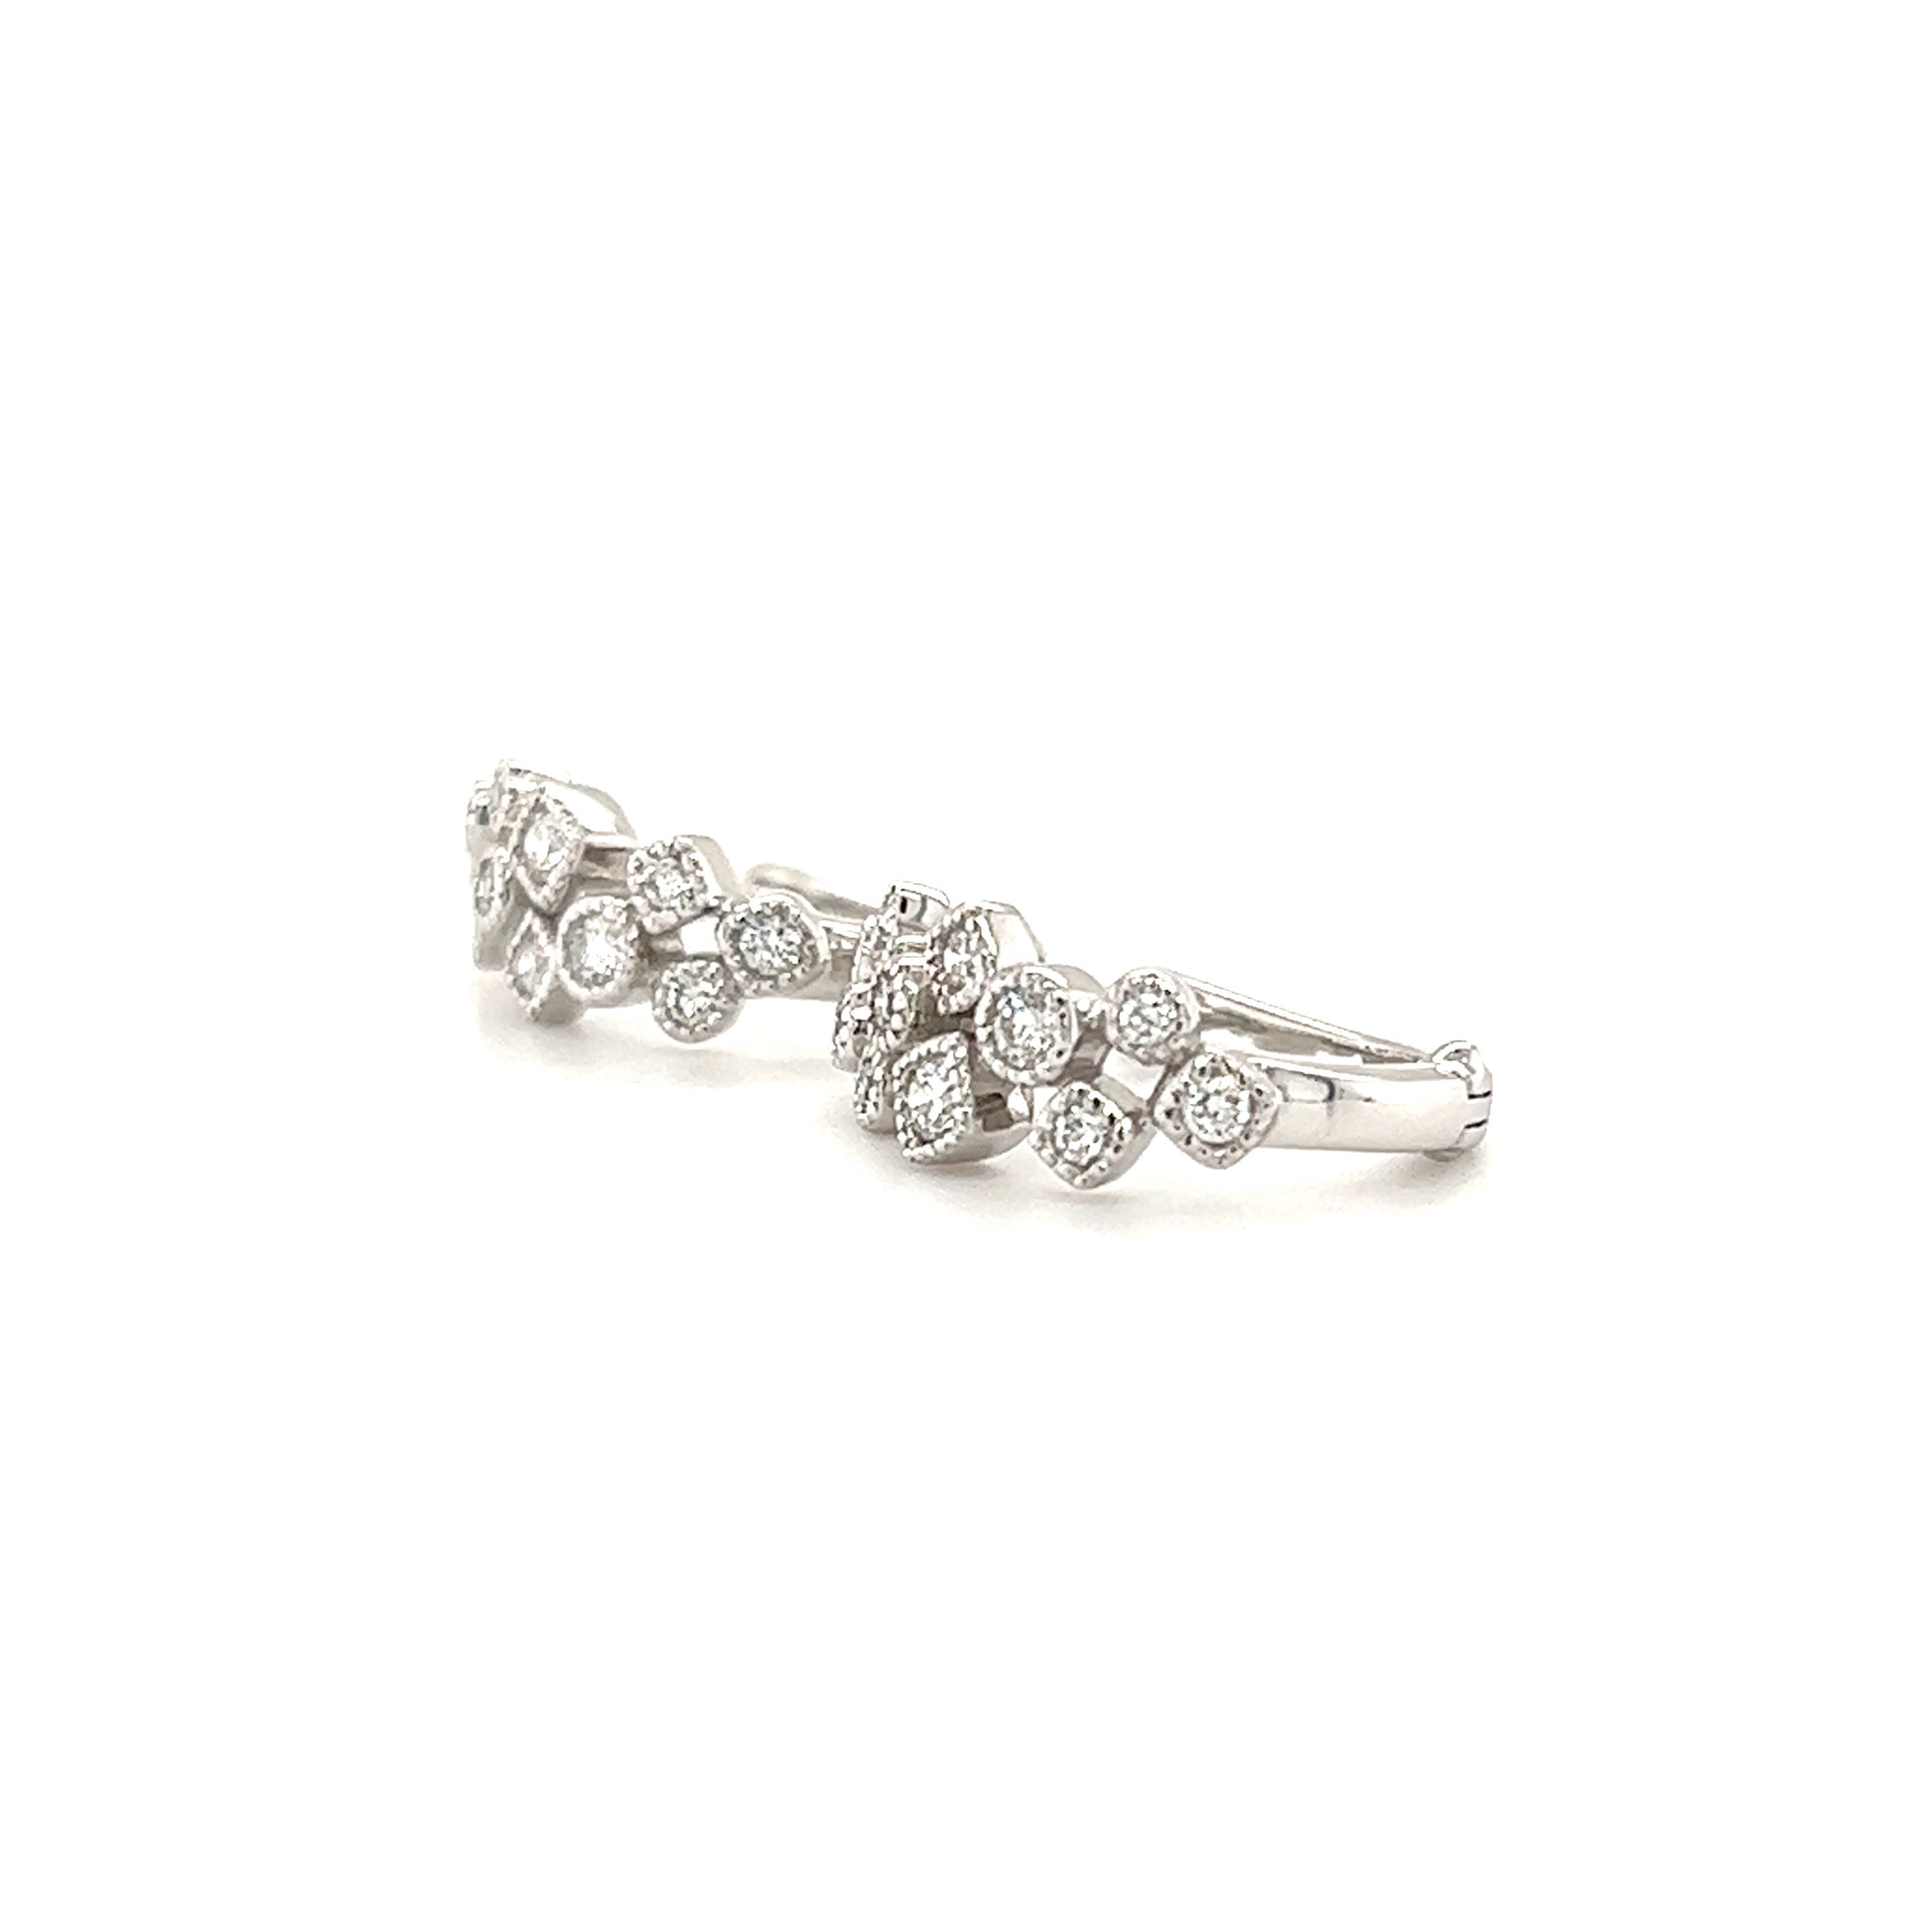 Cluster Diamond Hoop Earrings with 0.36ctw of Diamonds in 14K White Gold Bottom View